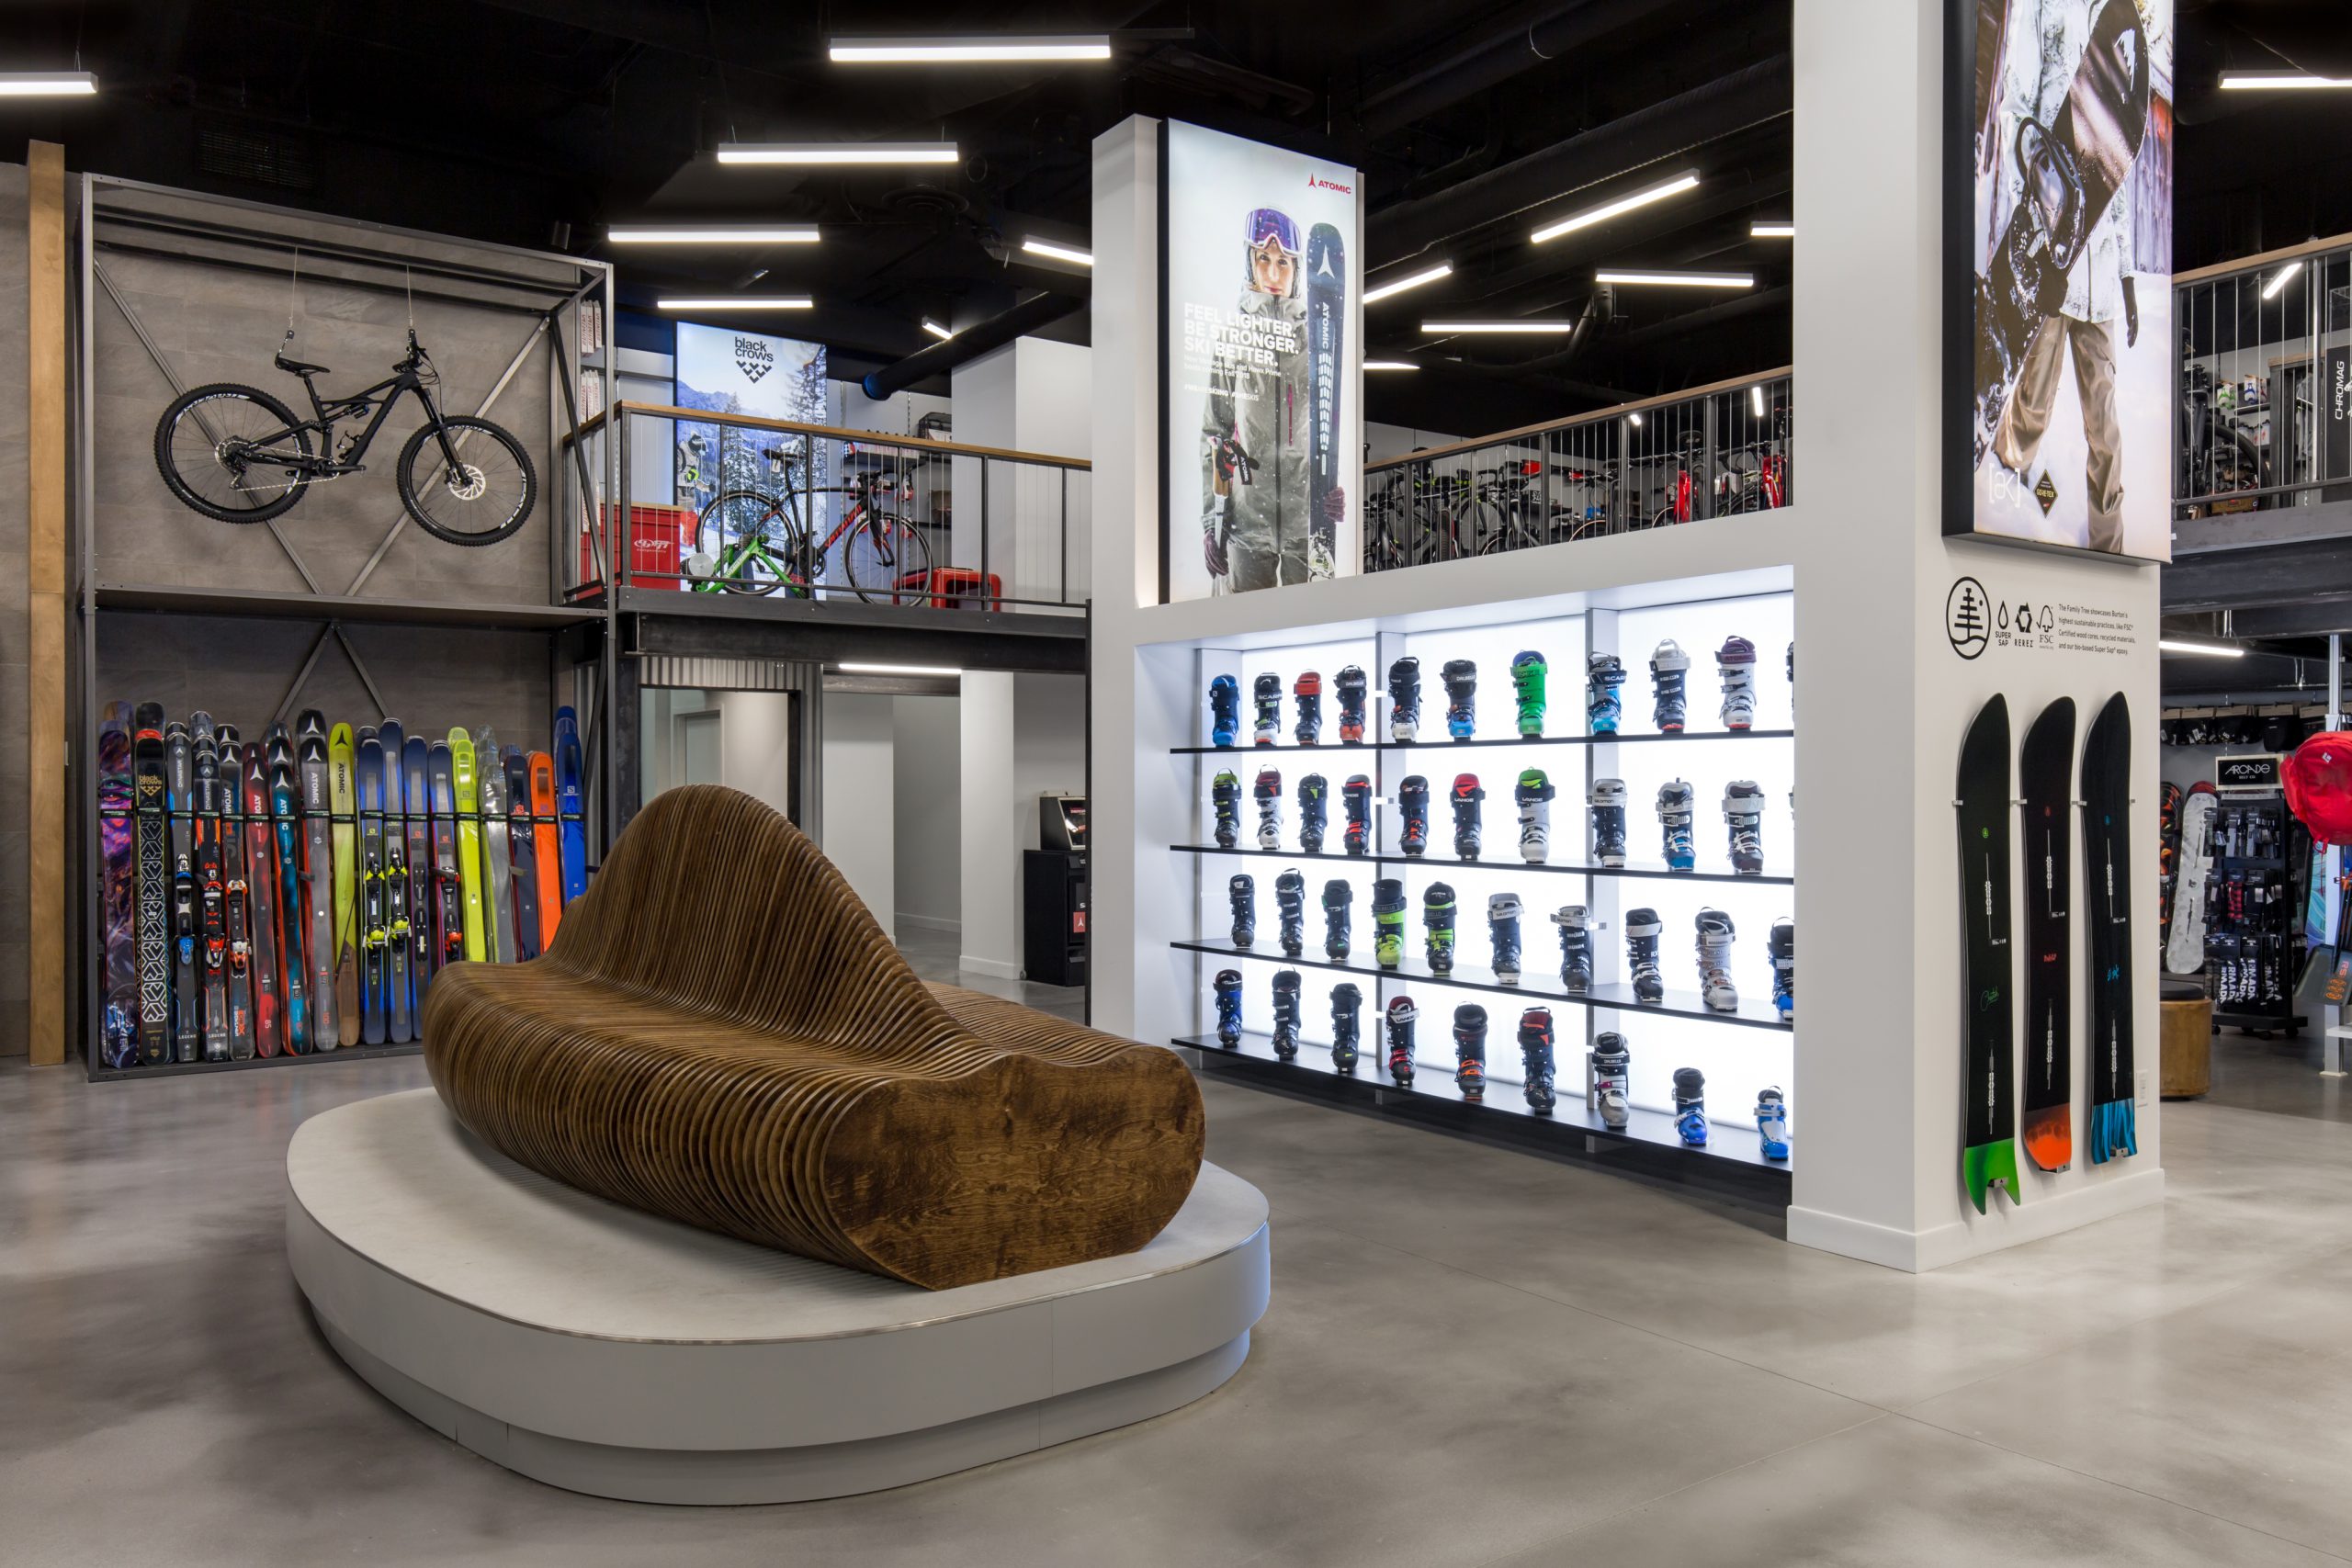 Comor Sports flagship location retail interior showing product displays and customer seating, by Cutler in Vancouver BC